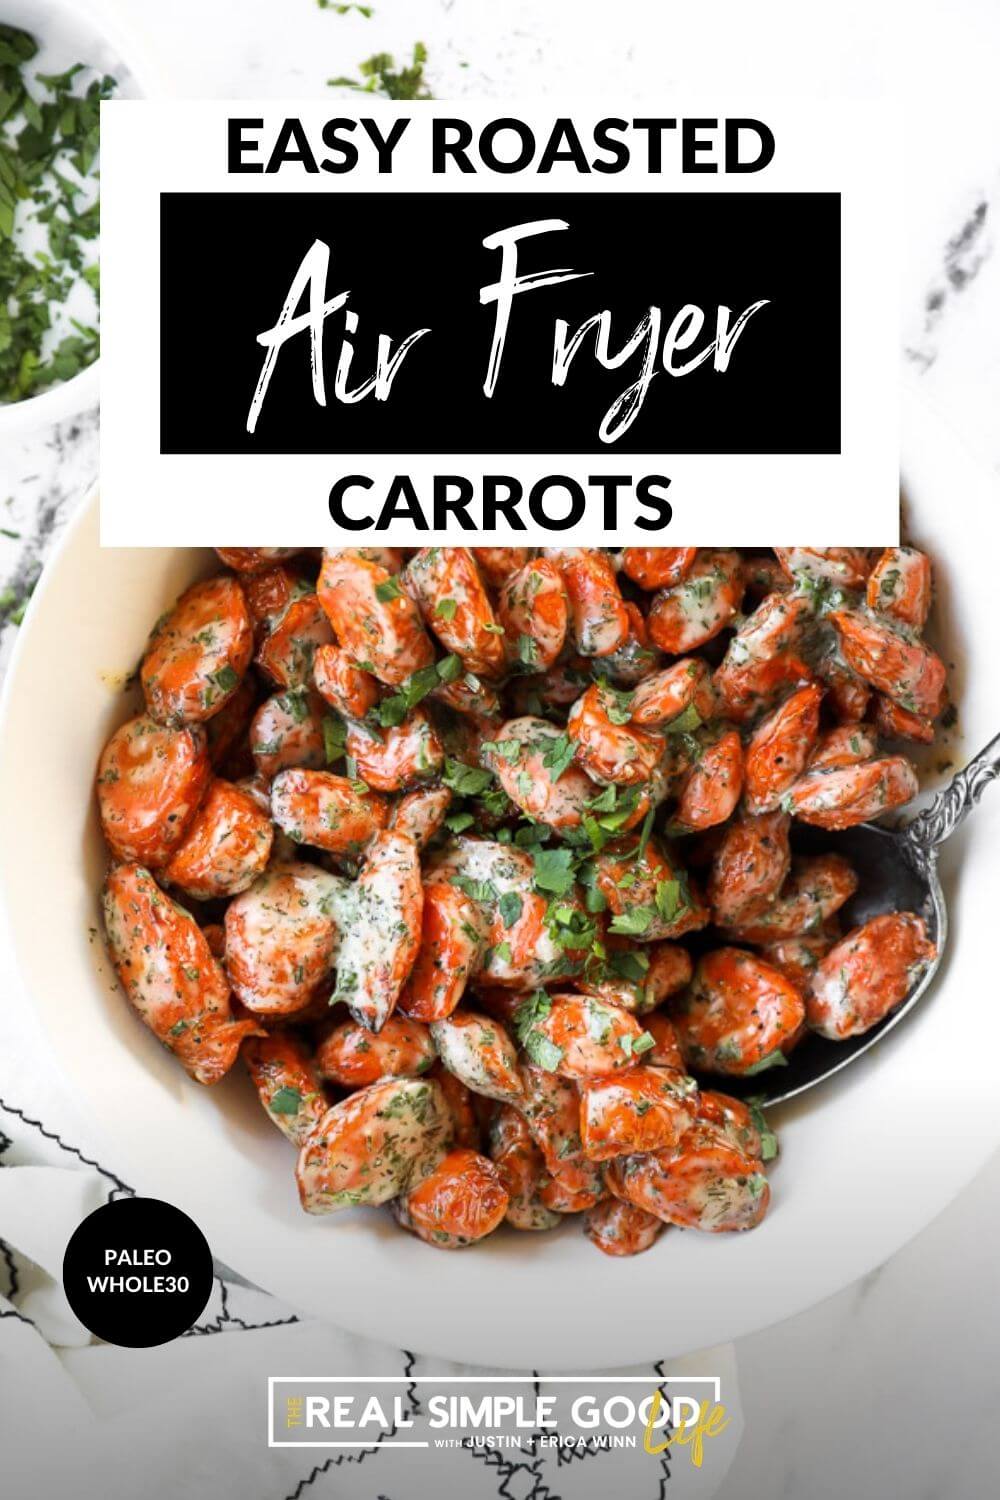 Vertical image with text overlay at the top. Air fryer carrots tossed in ranch sauce in a bowl with a serving spoon.  